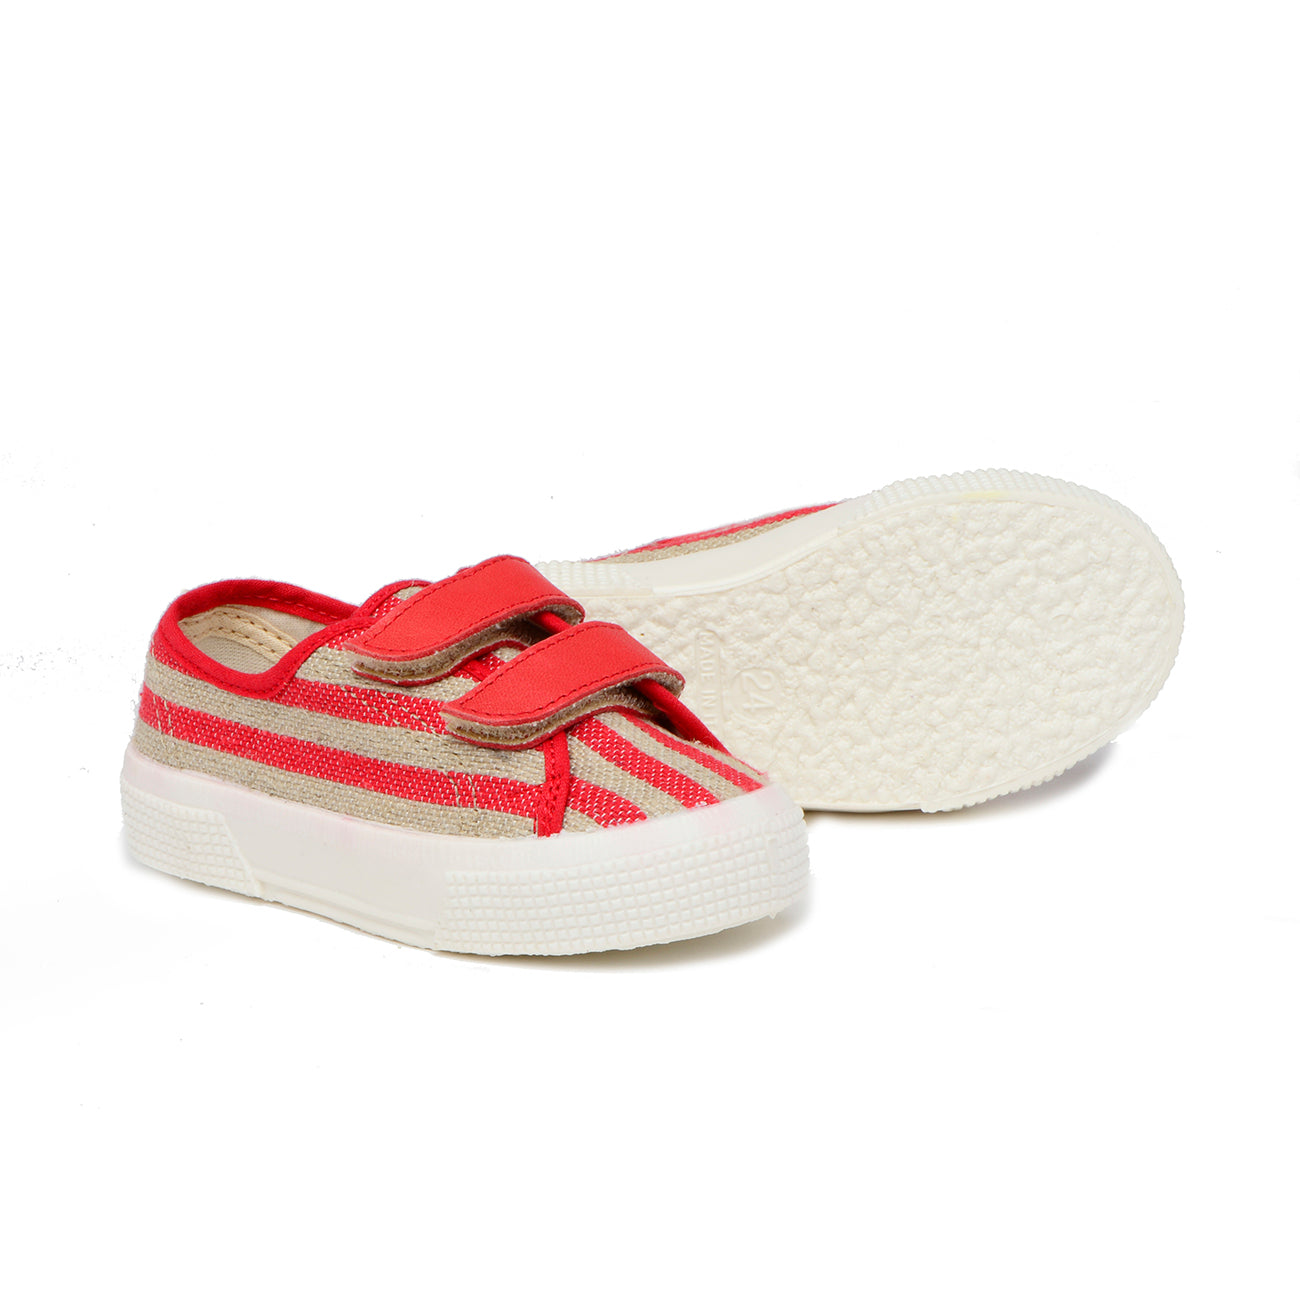 Boys & Girls Red Stripes Shoes